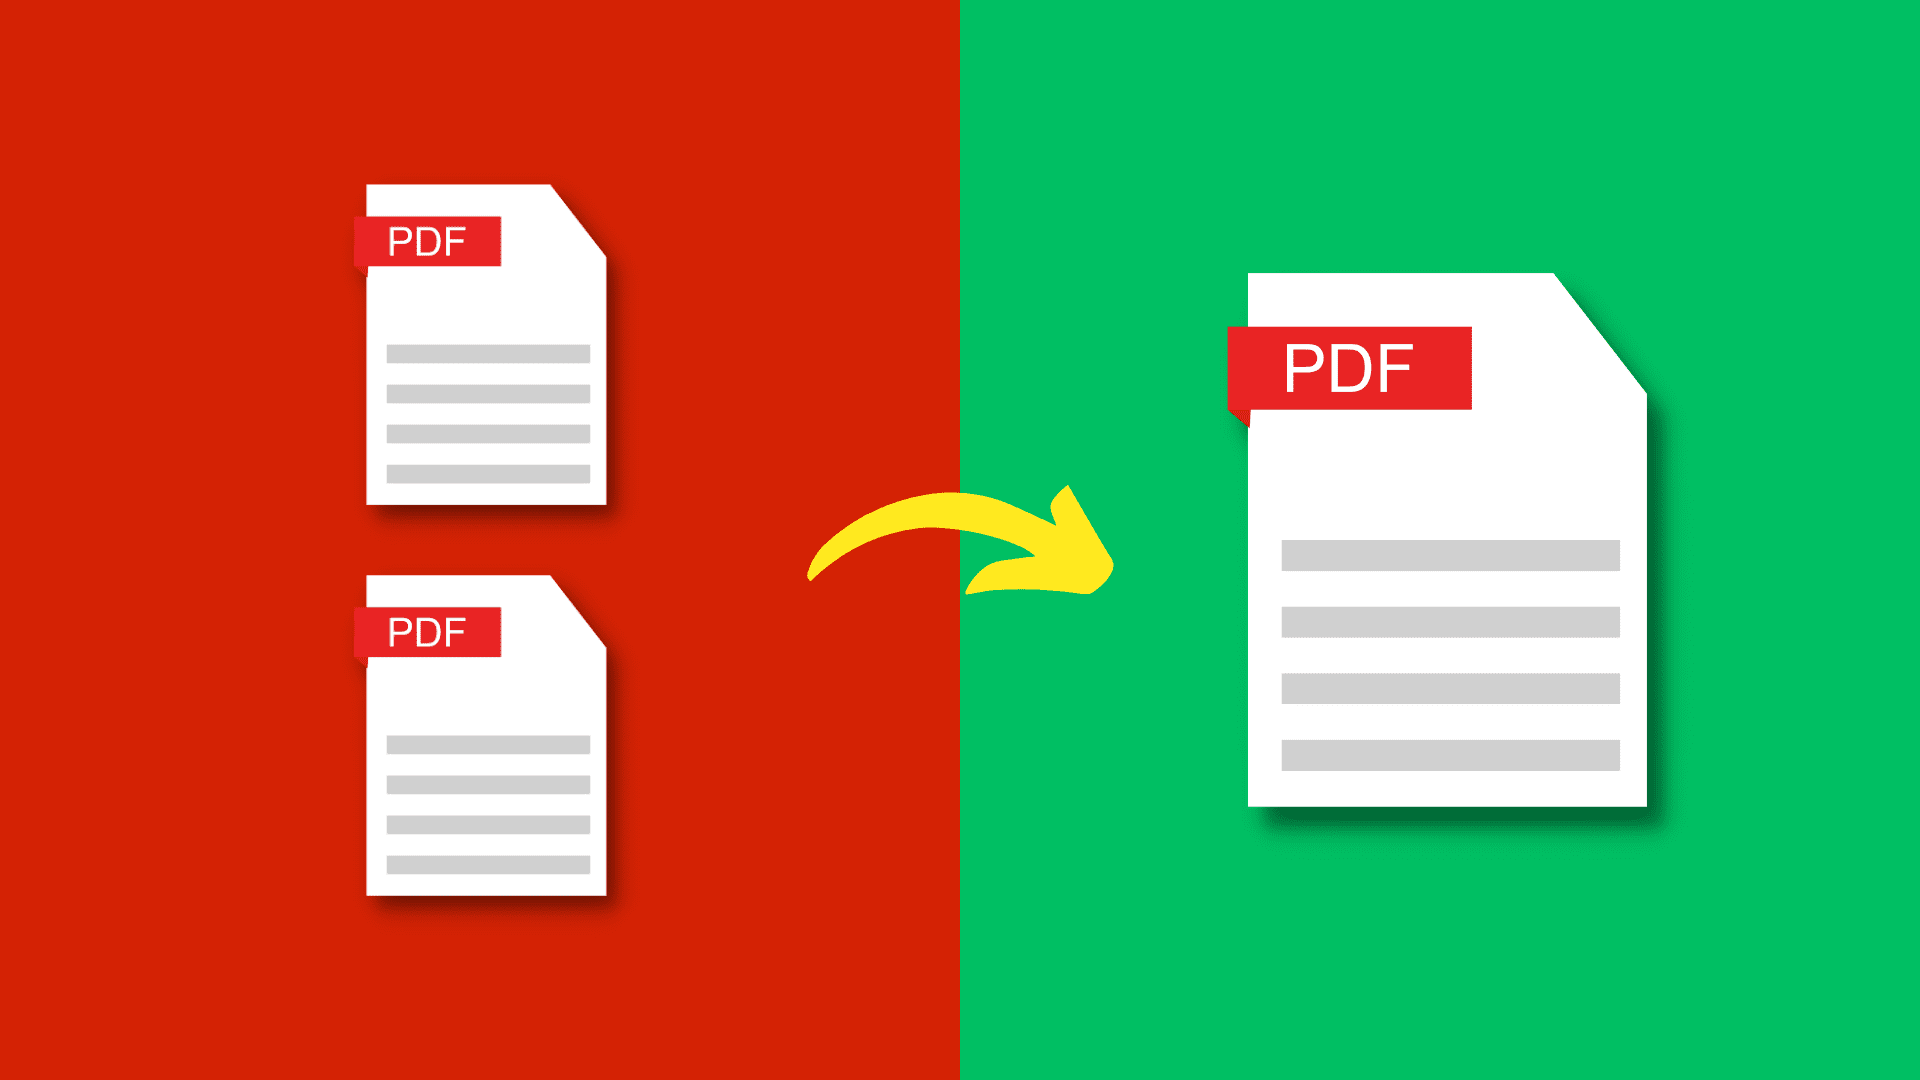 Merge two PDFs into one